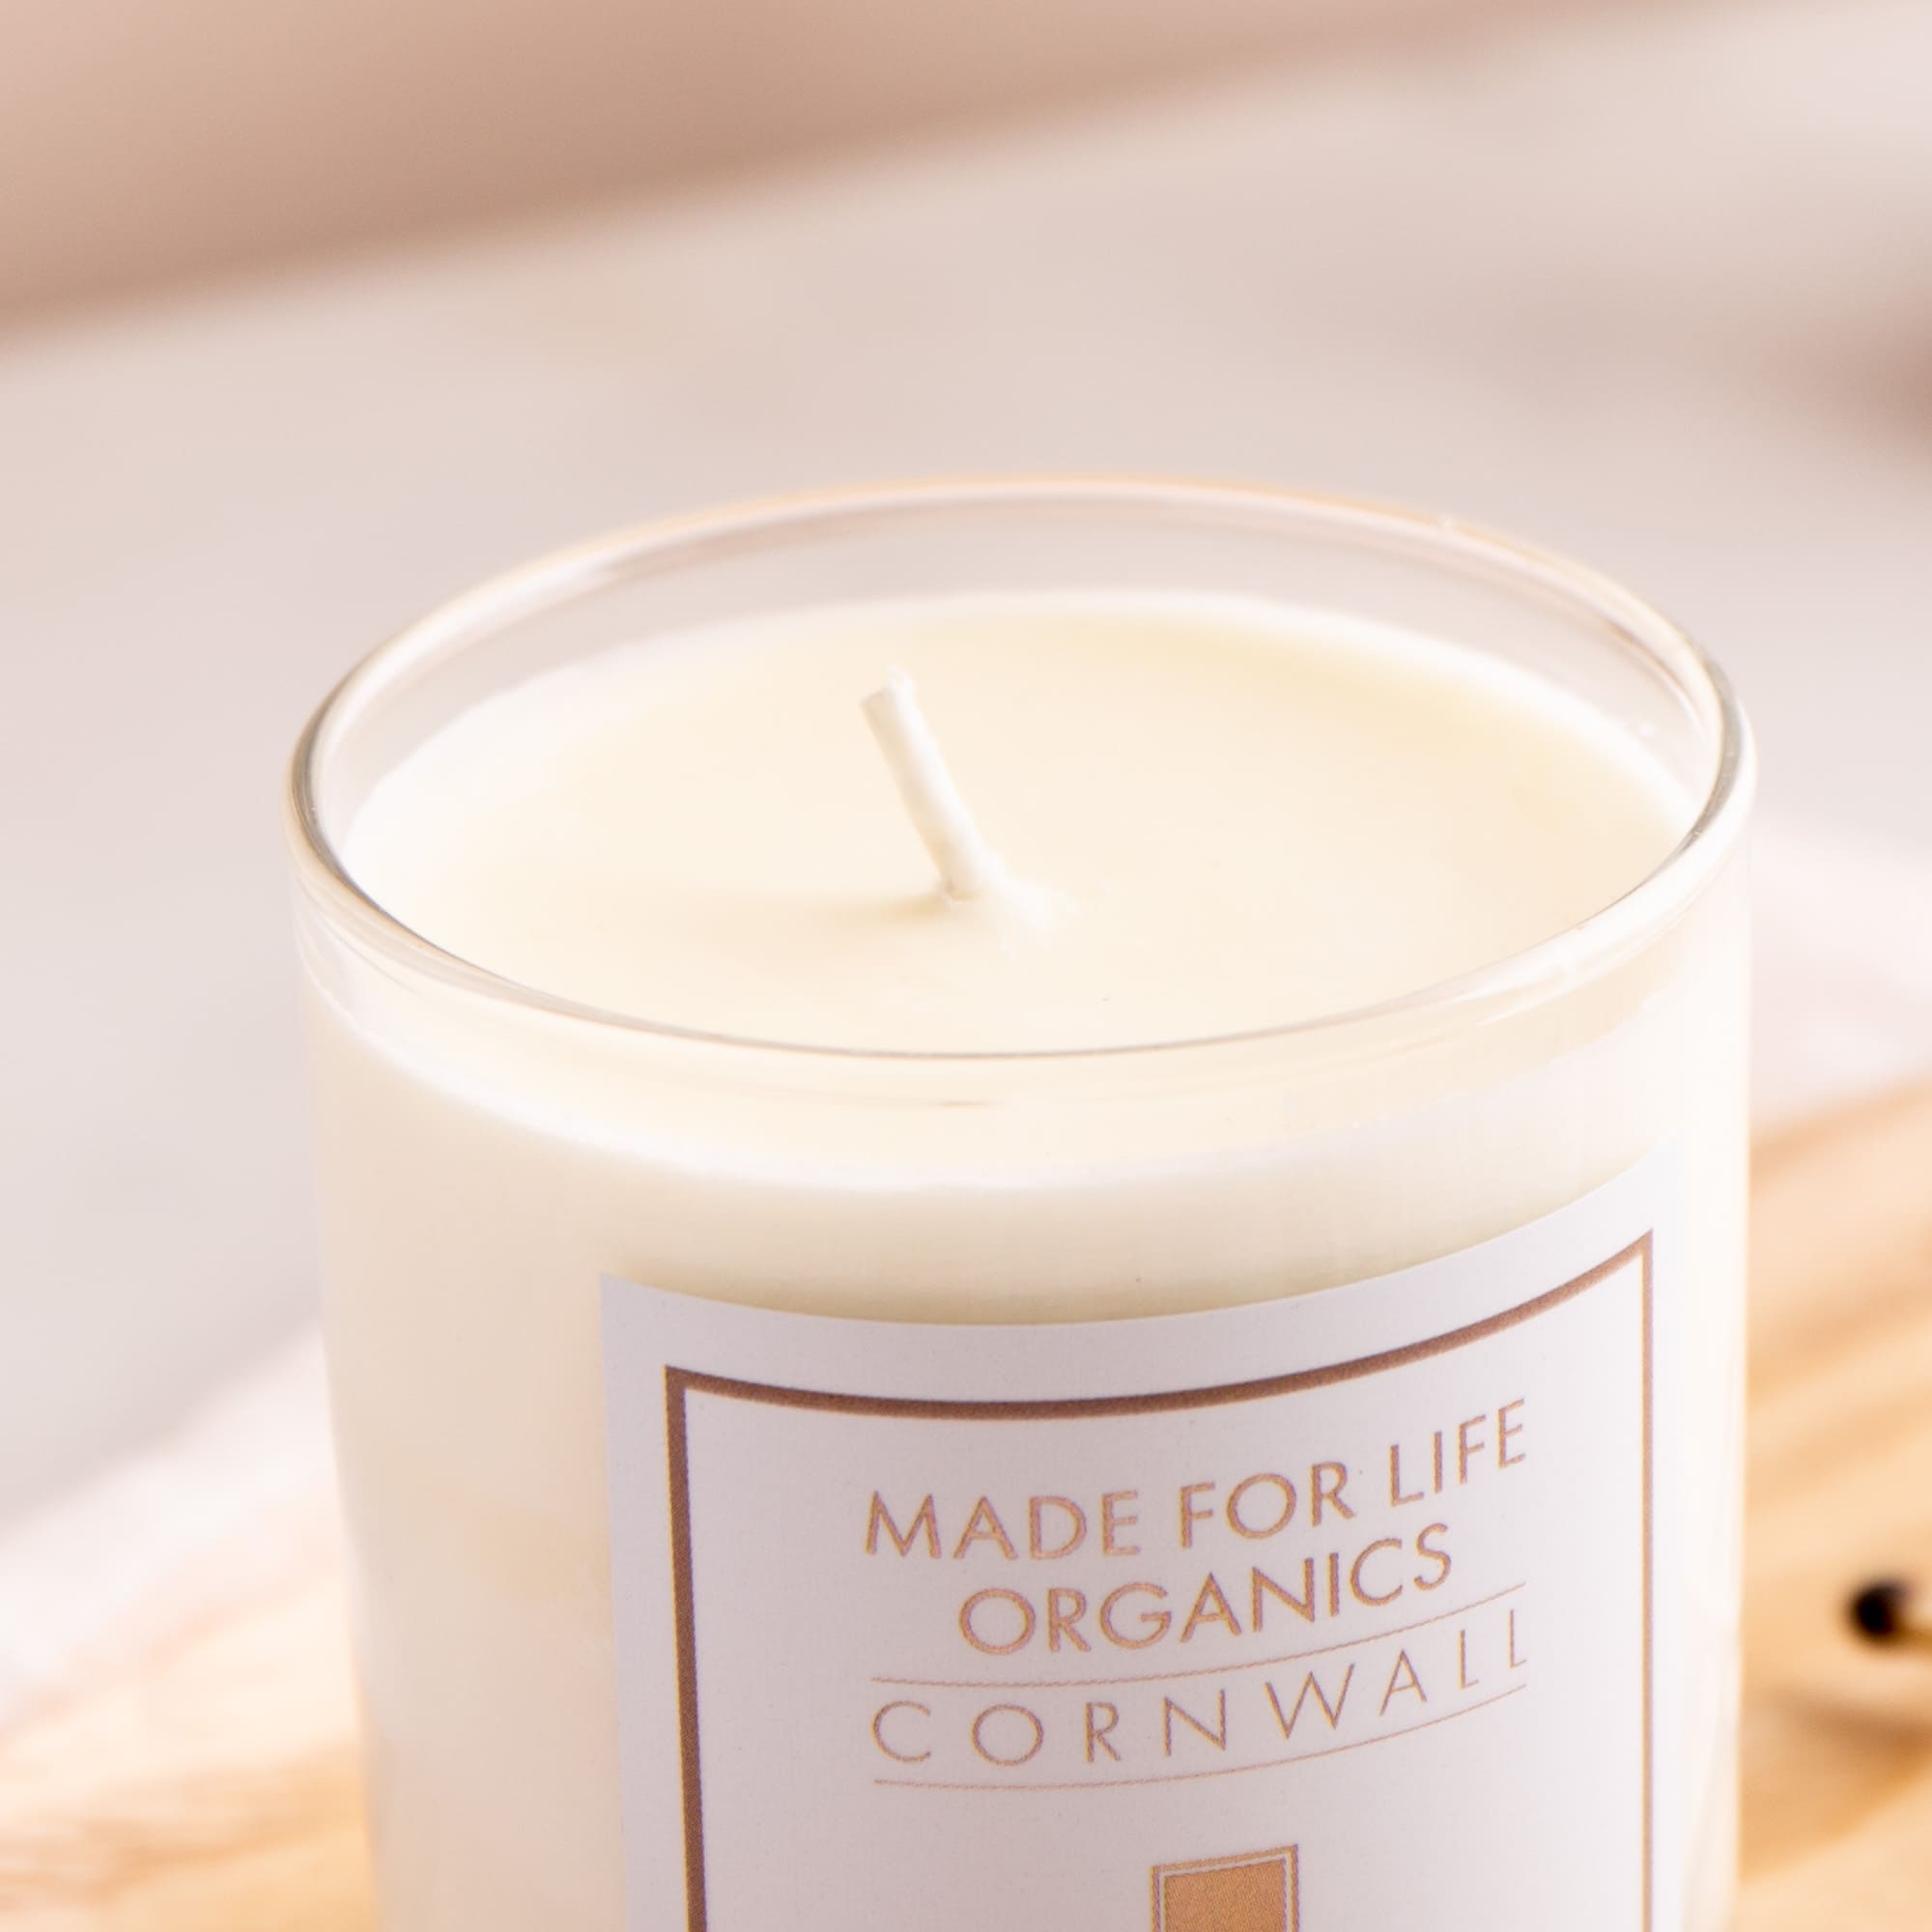 Orange and Cinnamon Candle 20CL